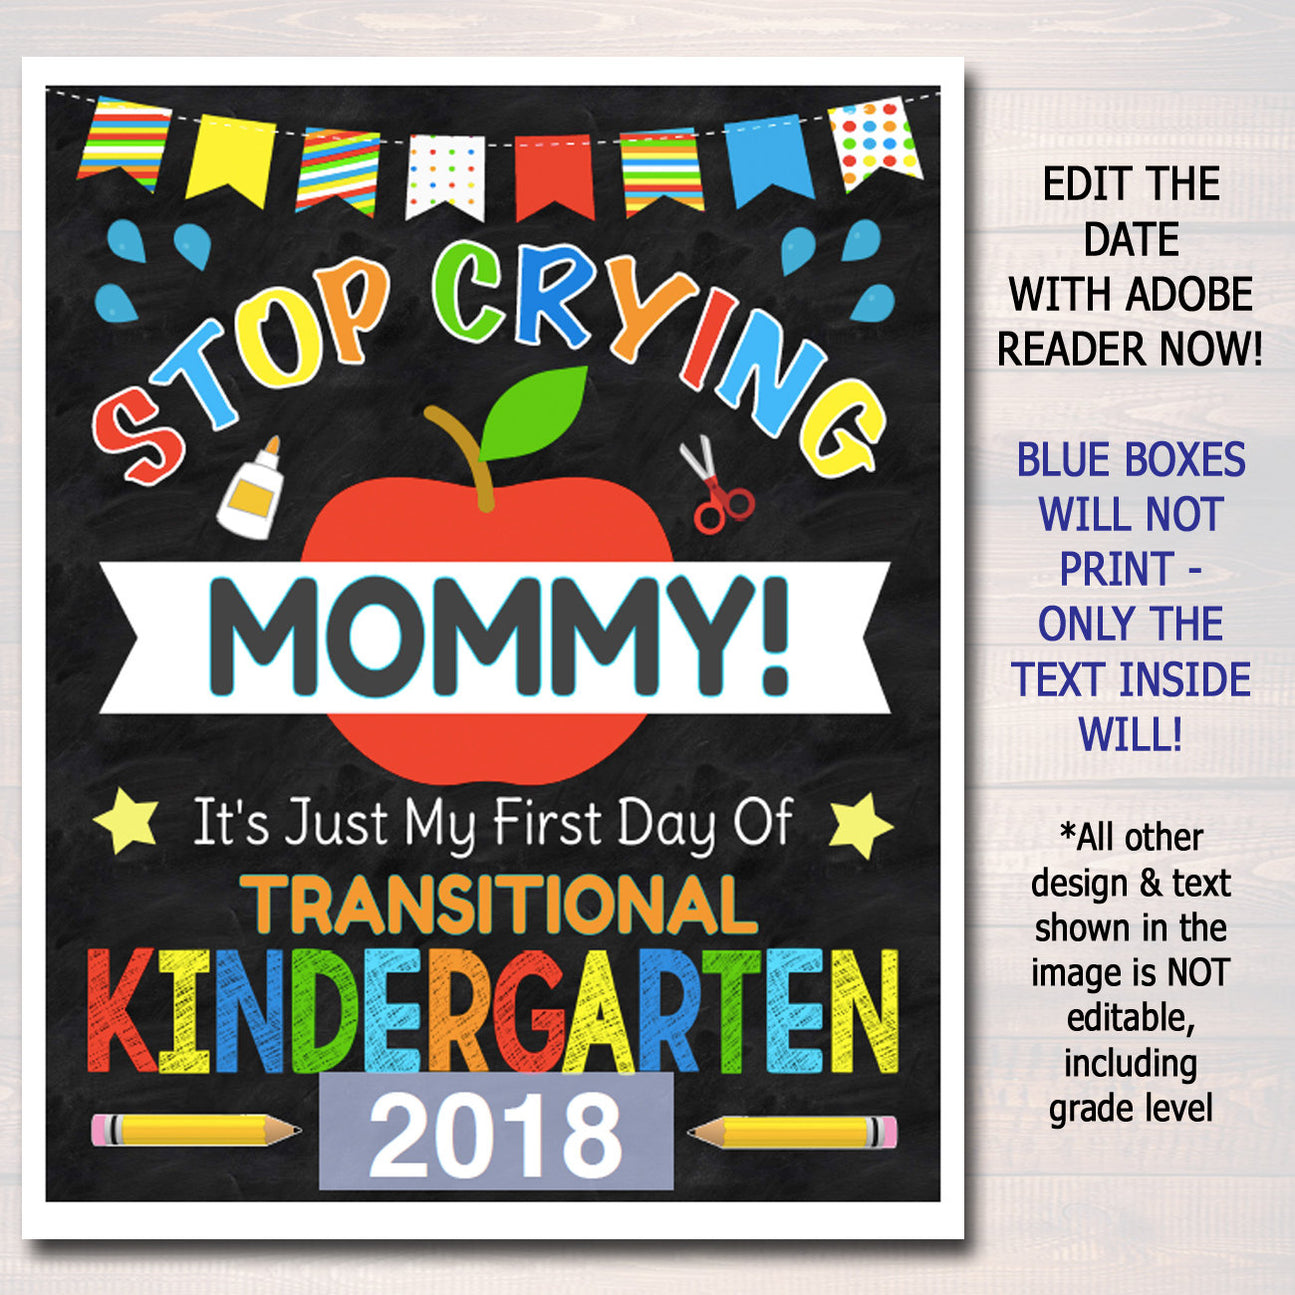 stop-crying-mommy-first-day-of-transitional-kindergarten-tidylady